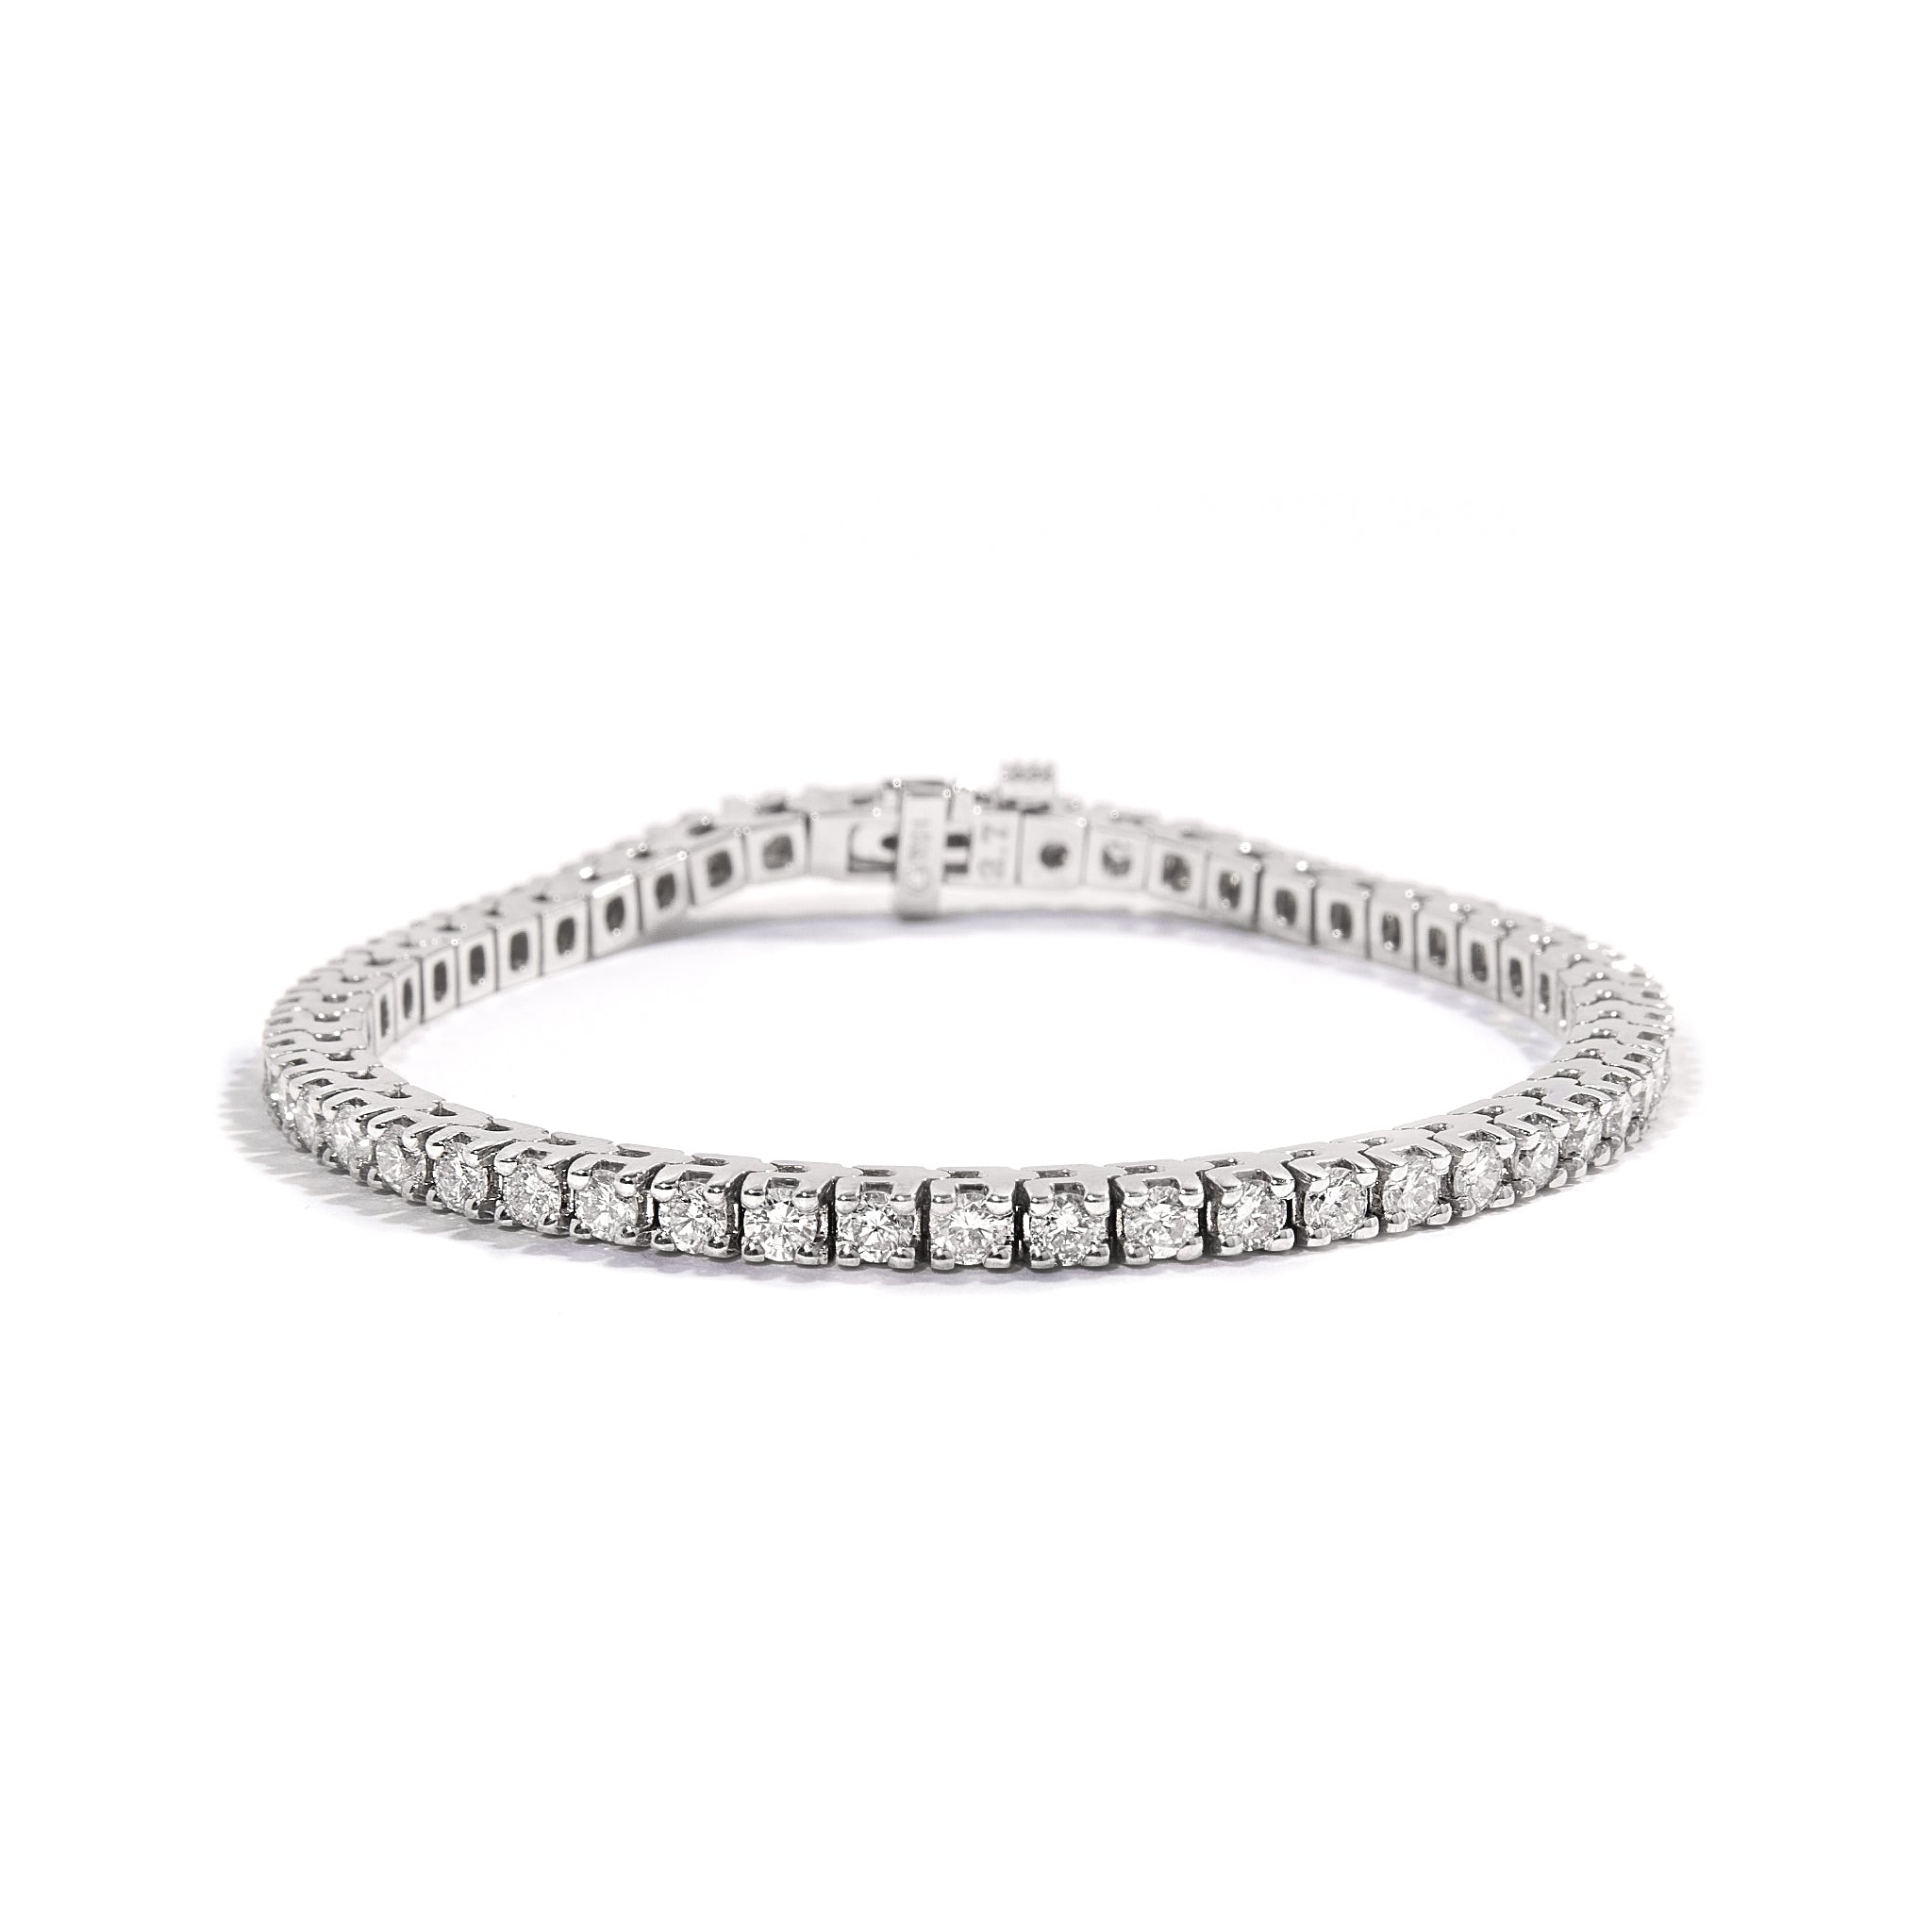 14ct White Gold Natural Diamond Tennis Bracelet adorned with sparkling diamonds. Crafted in 14 carat white gold. Features a total of 4.42 carats of diamonds. Weighs 16.11 grams.